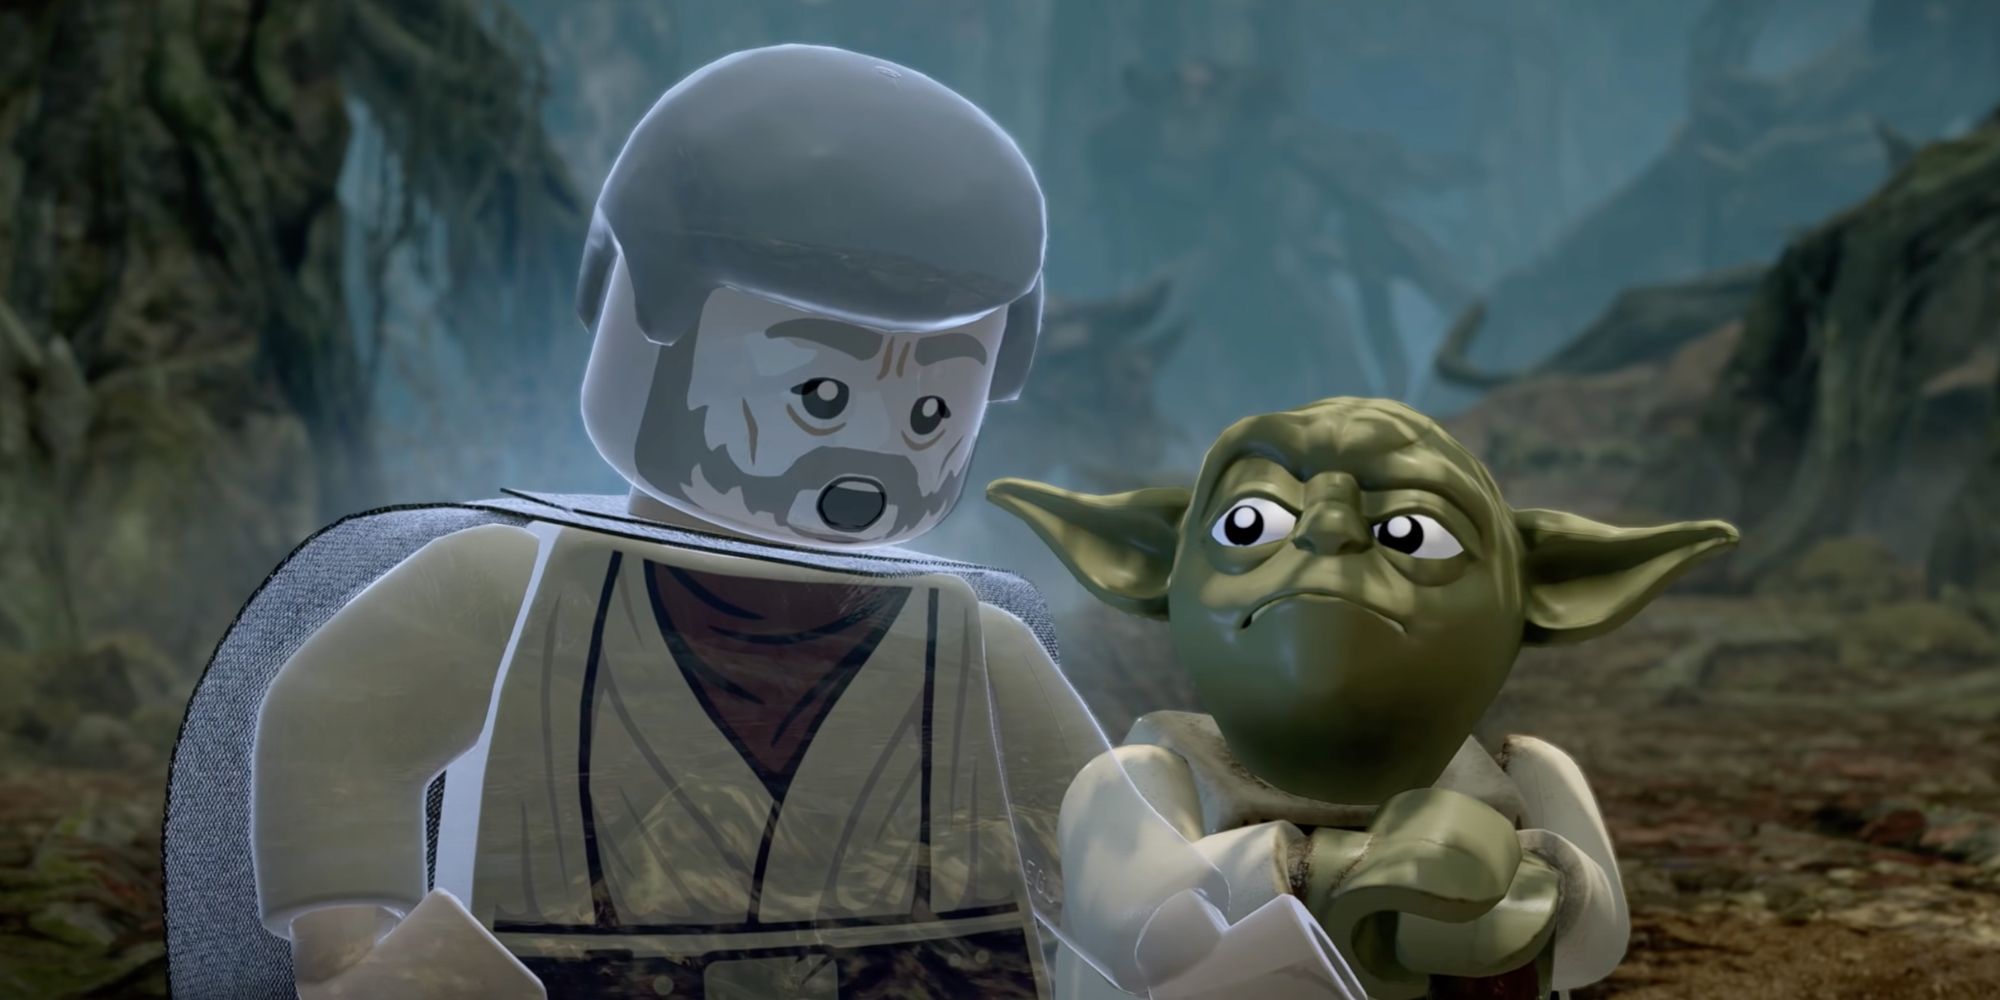 Yaddle speaking in more common sentence structures in LEGO Star Wars only makes Yoda's mannerisms more confusing